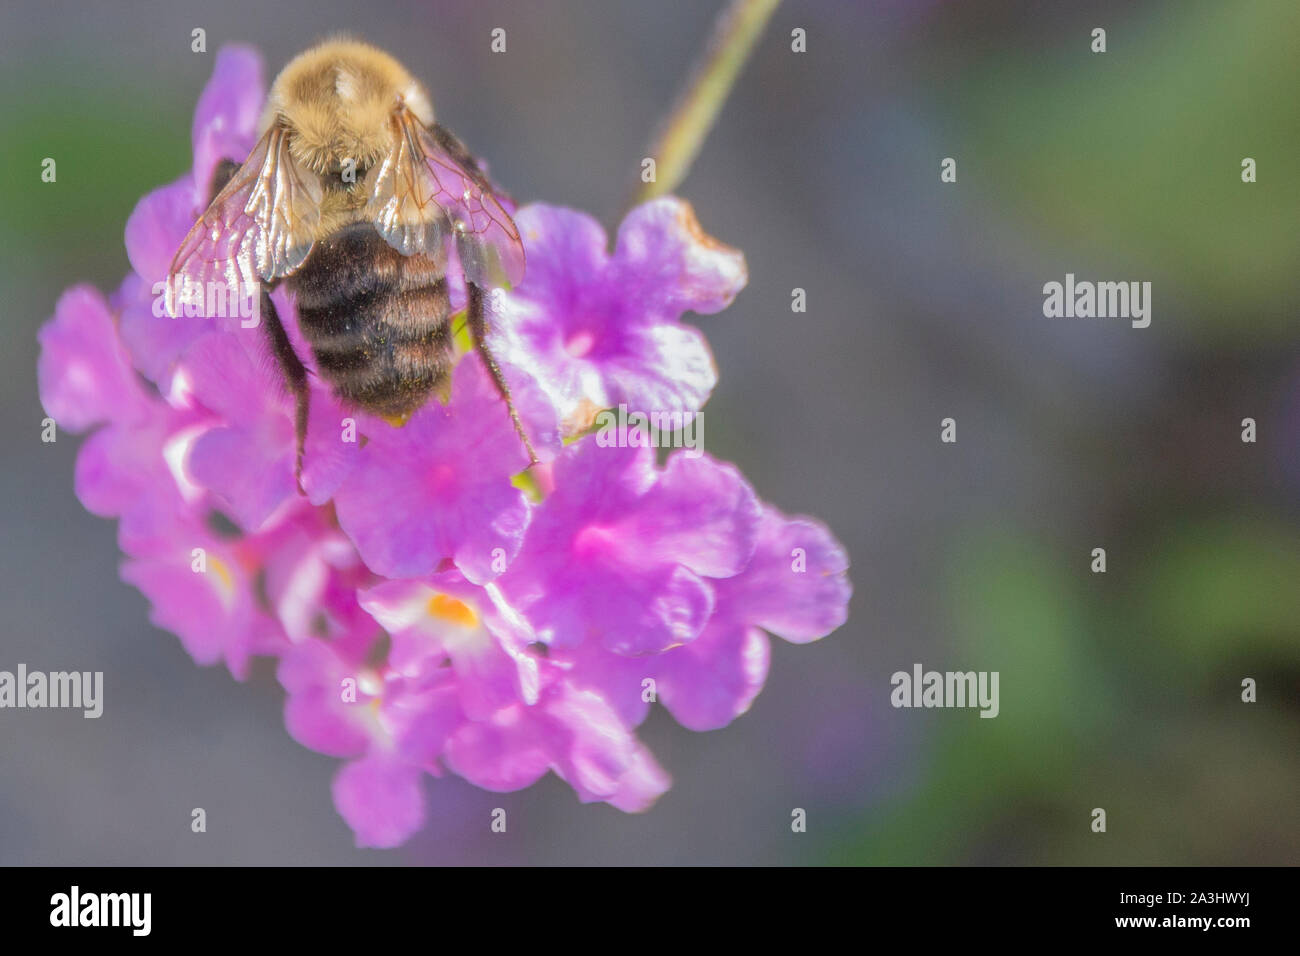 Common Eastern Bumble Bee (Bombus impatiens) on a purple flower. Stock Photo